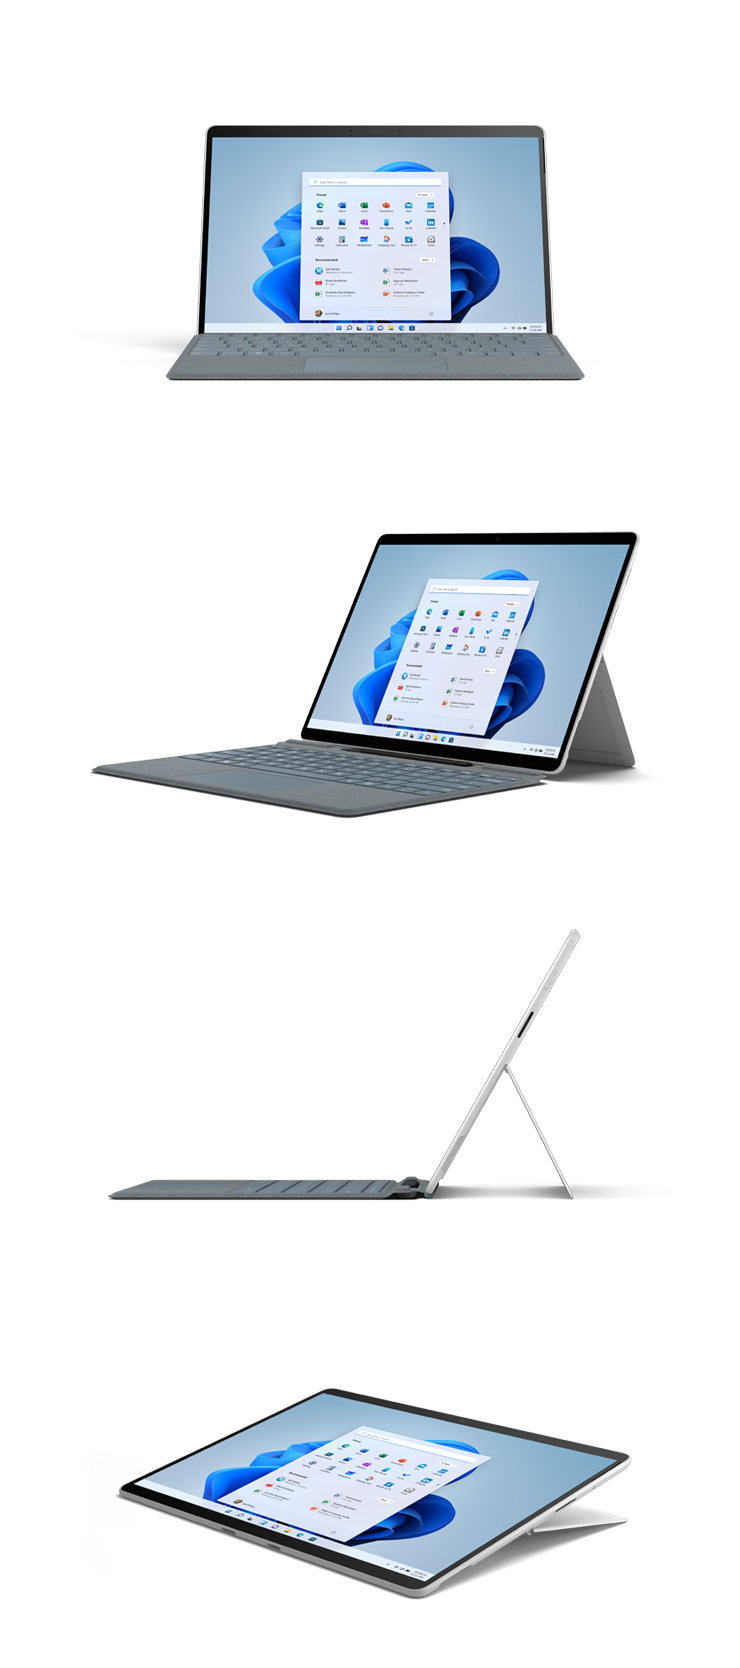 Renders of Platinum Surface Pro X from straight on, angled, side-view, and studio mode.